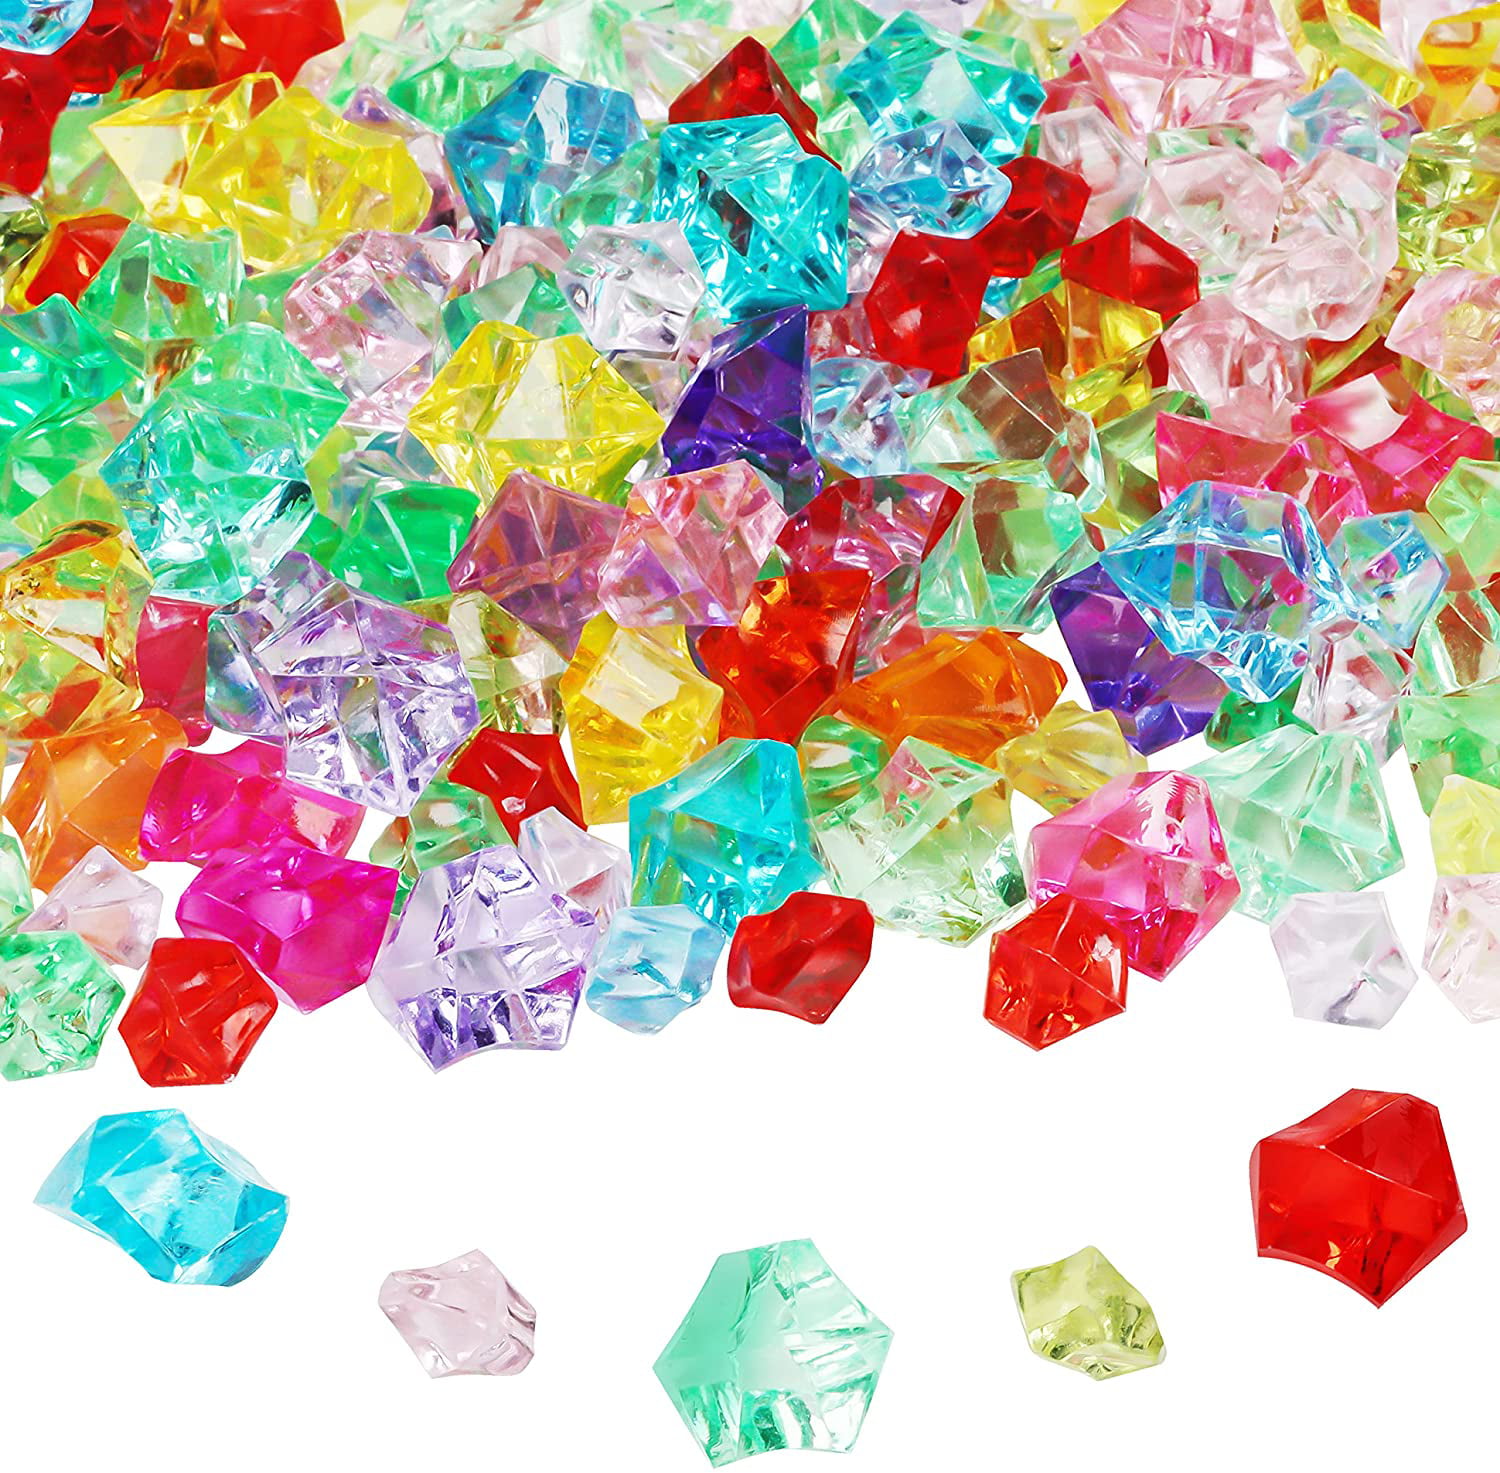 Details about   ICE ROCKS Clear Fake Crushed Diamonds Plastic Crystals Gems 1000 Pcs By DOMESTAR 